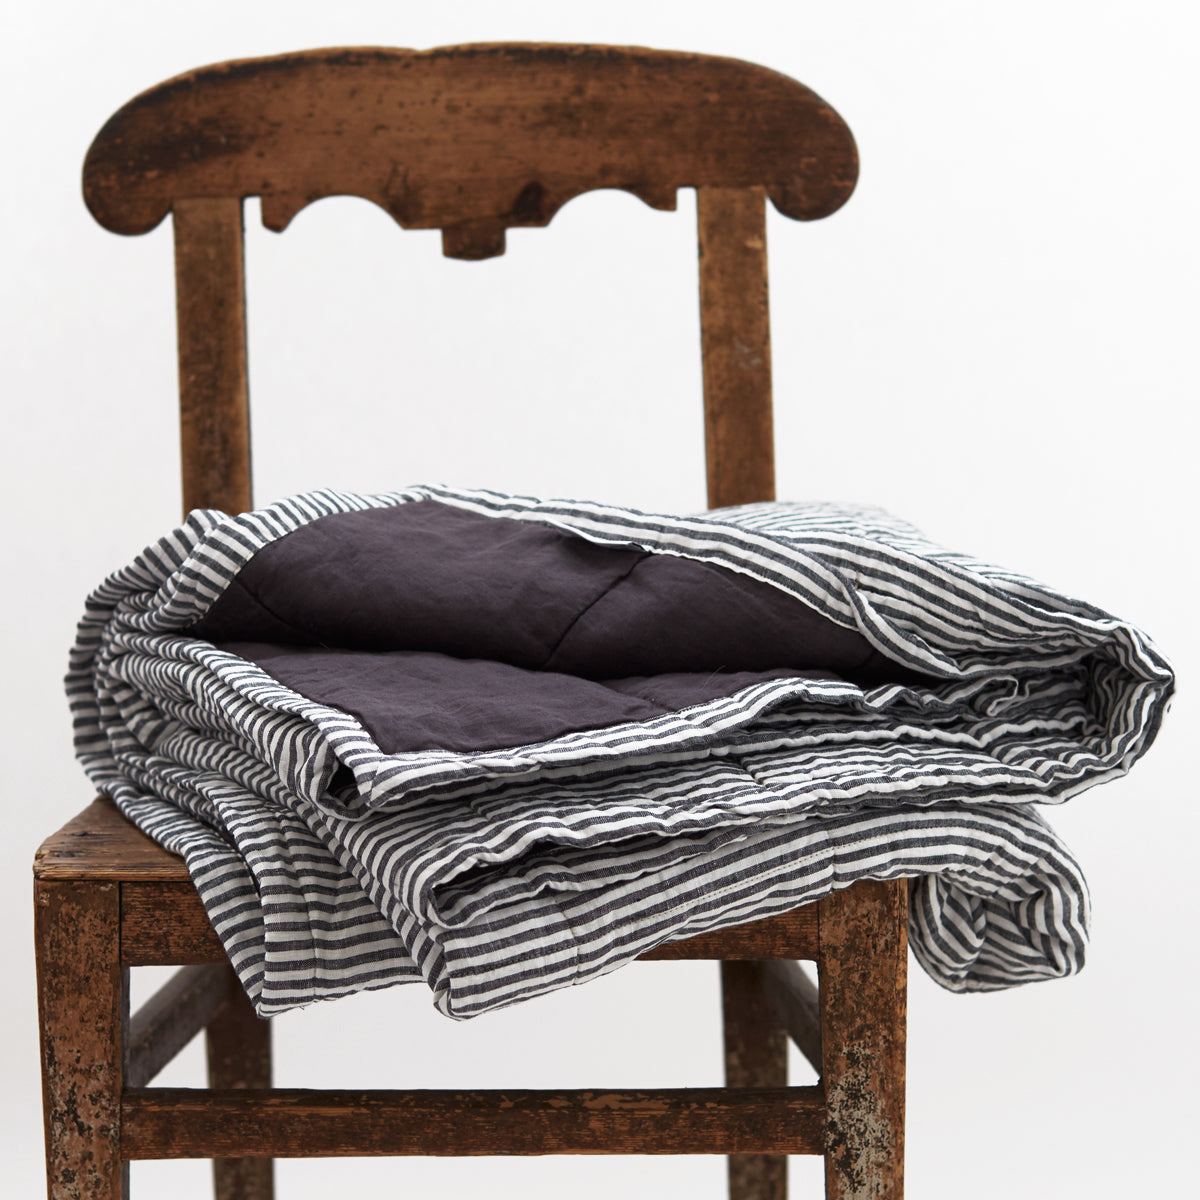 Quilted Throw in Charcoal Stripe and Charcoal